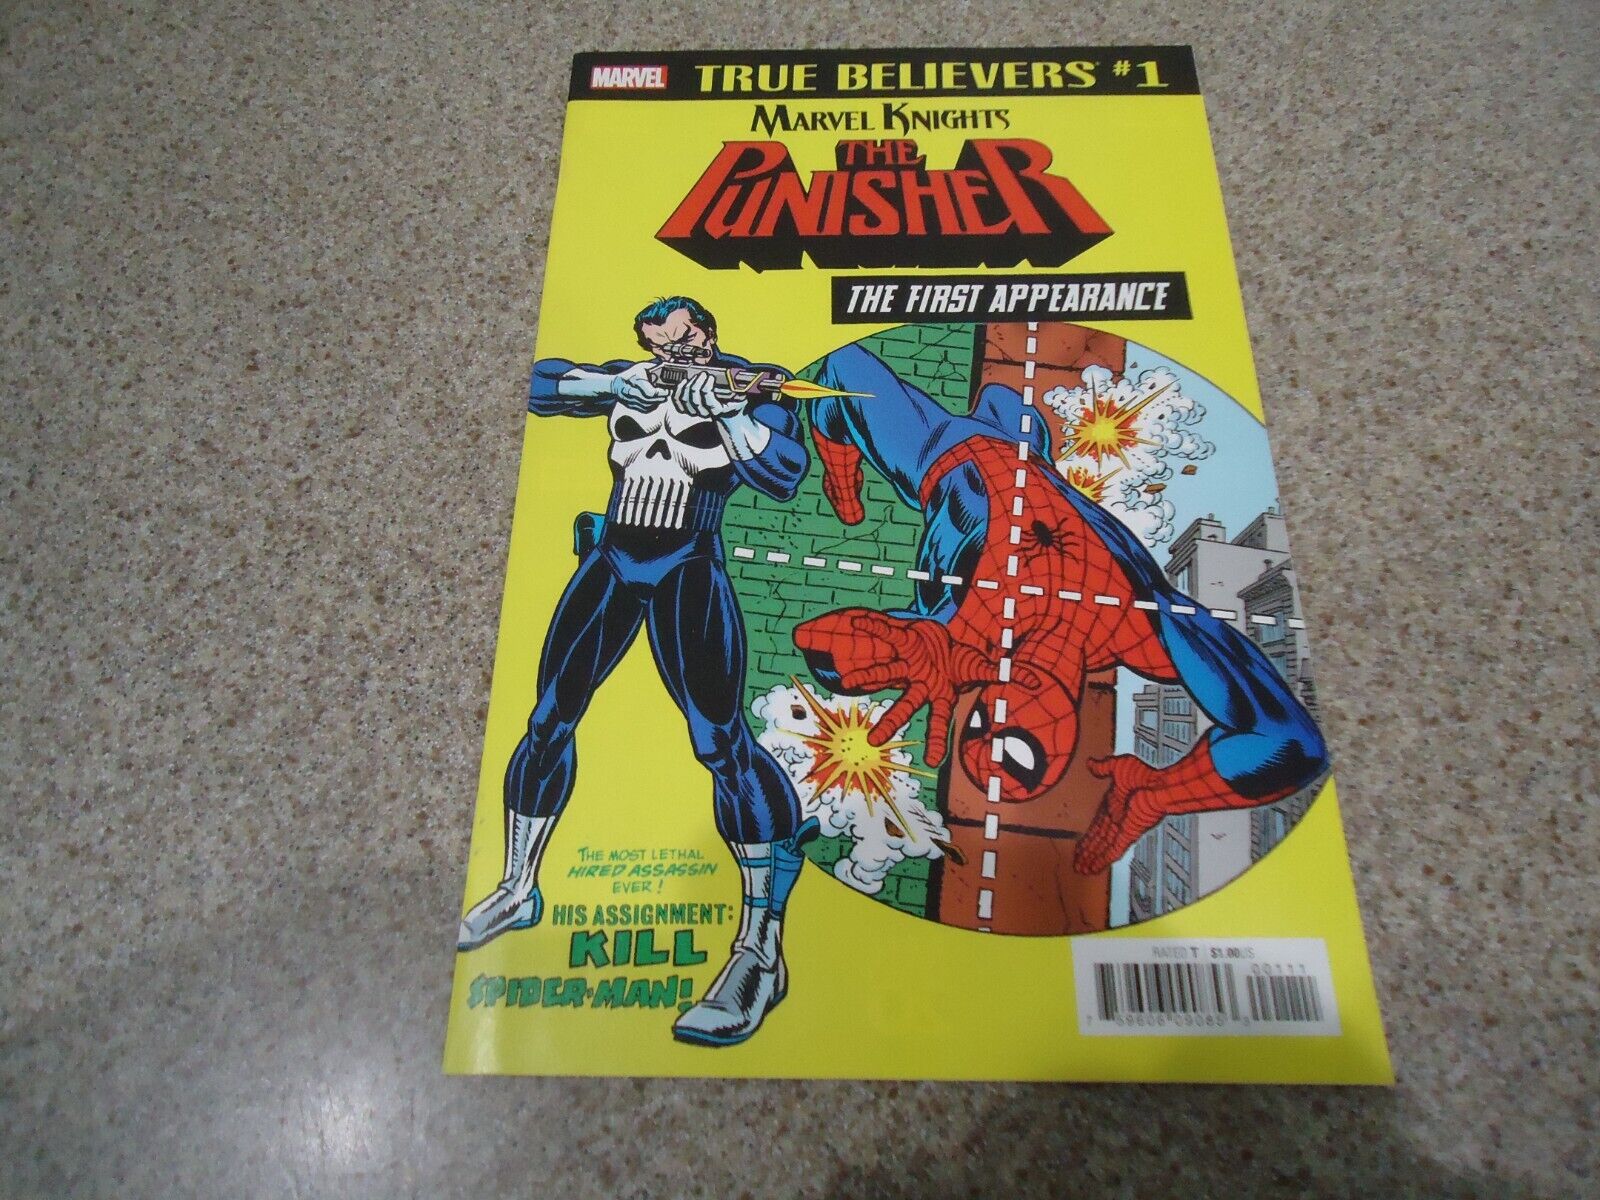 TRUE BELIEVERS #1 THE PUNISHER FIRST APPEARANCE